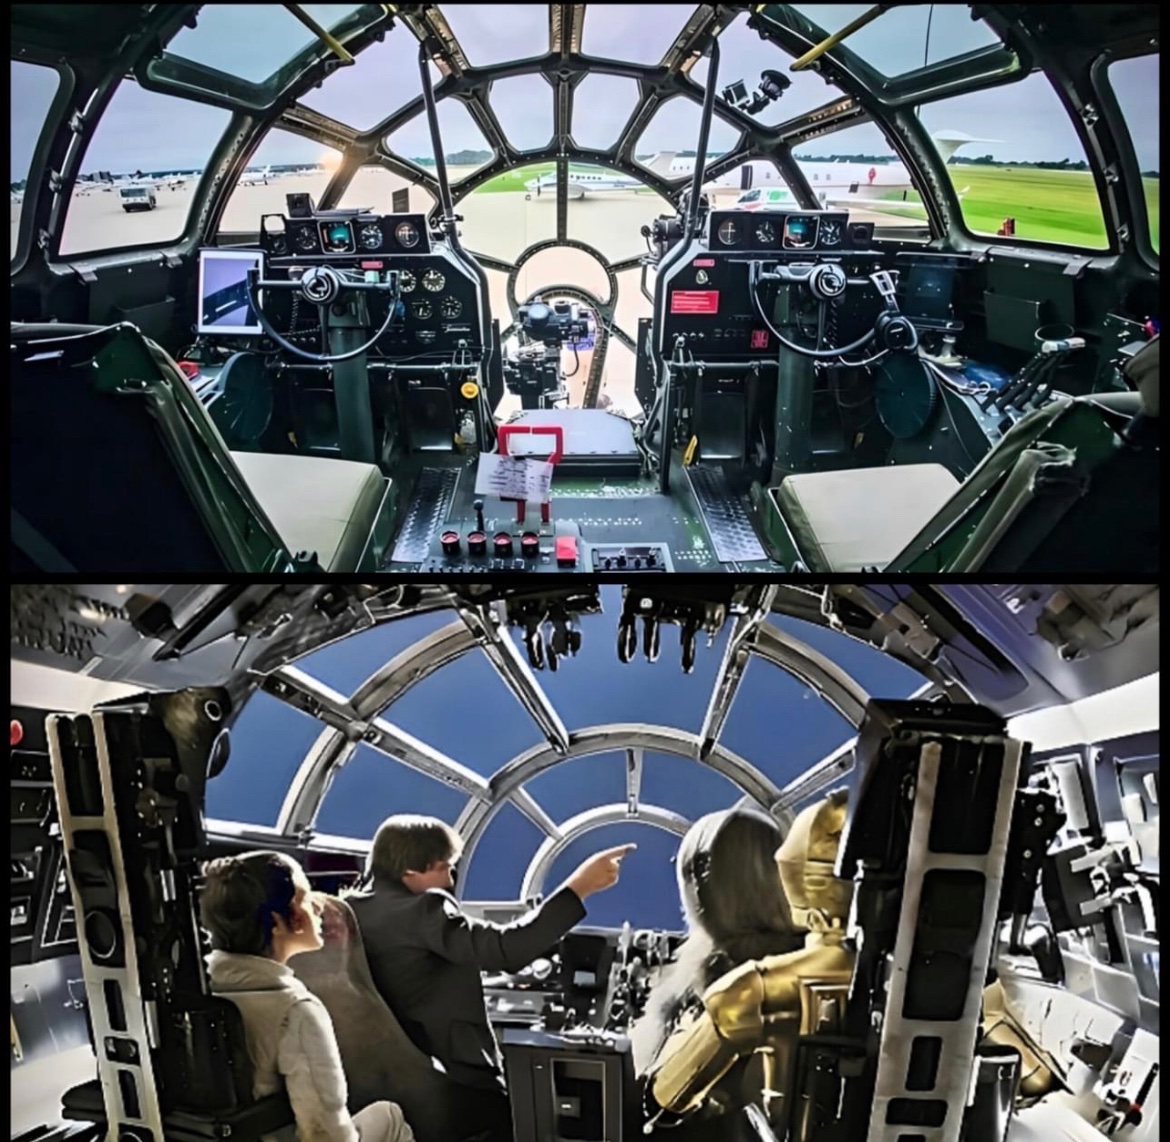 The Millennium Falcon’s cockpit was inspired by the WWII B-29 Superfortress bomber ✈️

#Maythe4thBeWithYou